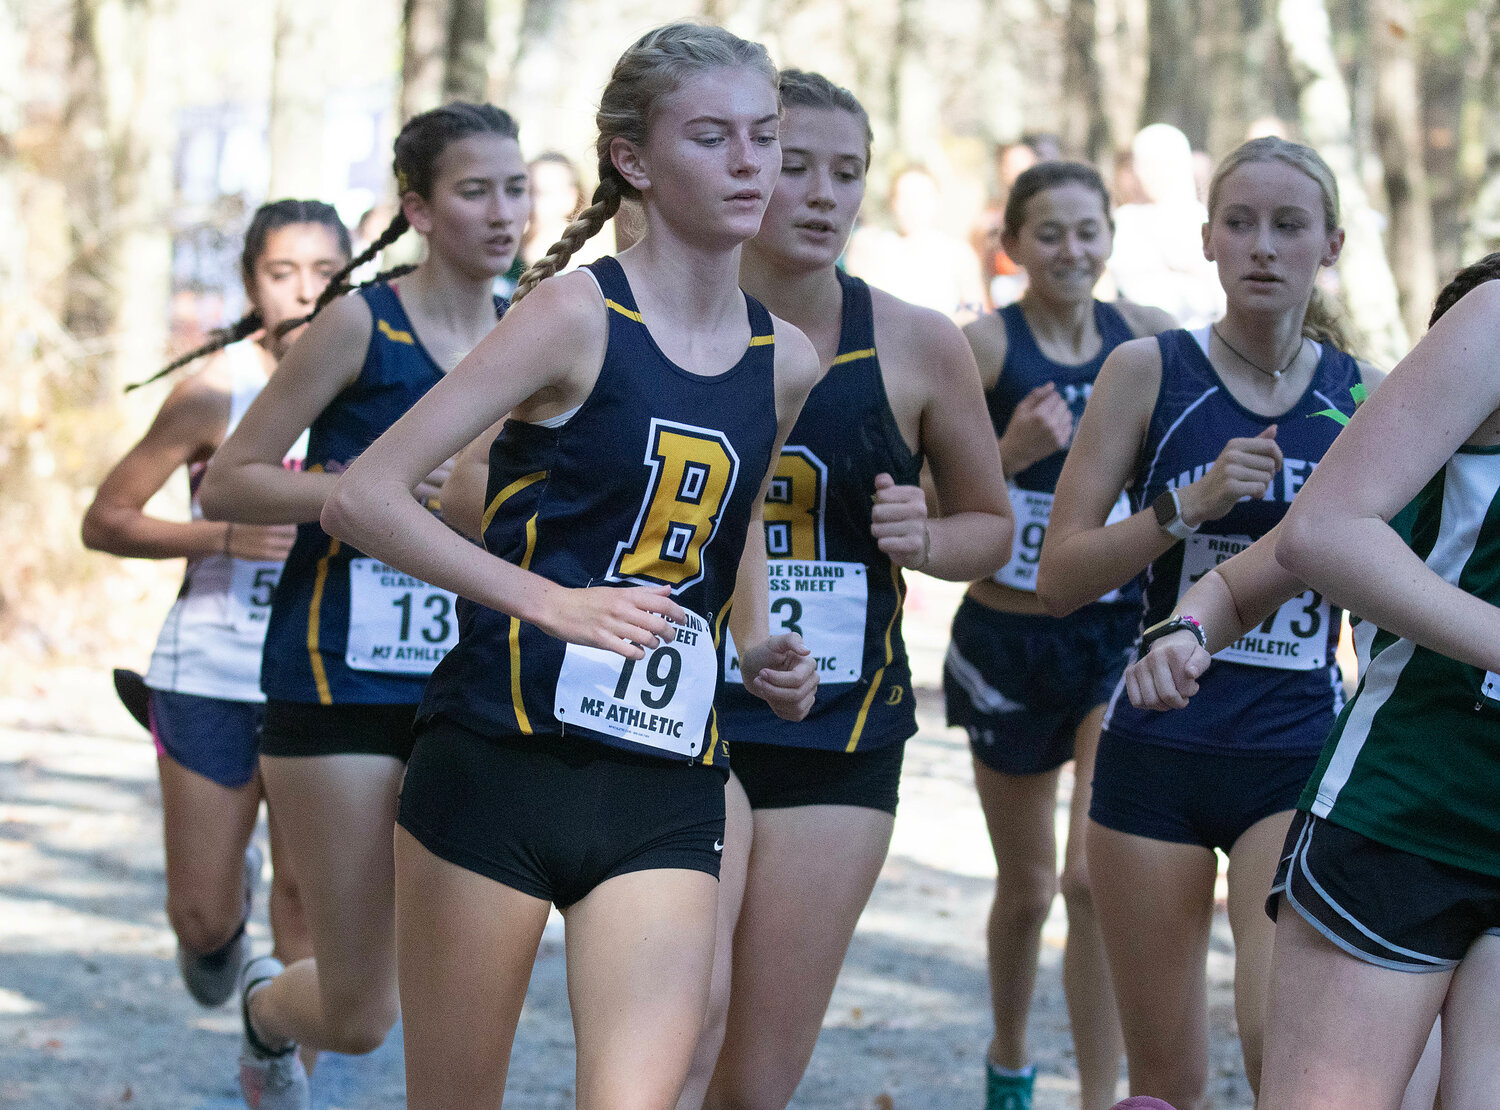 Maeve Kelly (left) leads teammates Sophie Gardos (left) and Jane Bryant (right) along the course at the Class B Championship on Saturday.